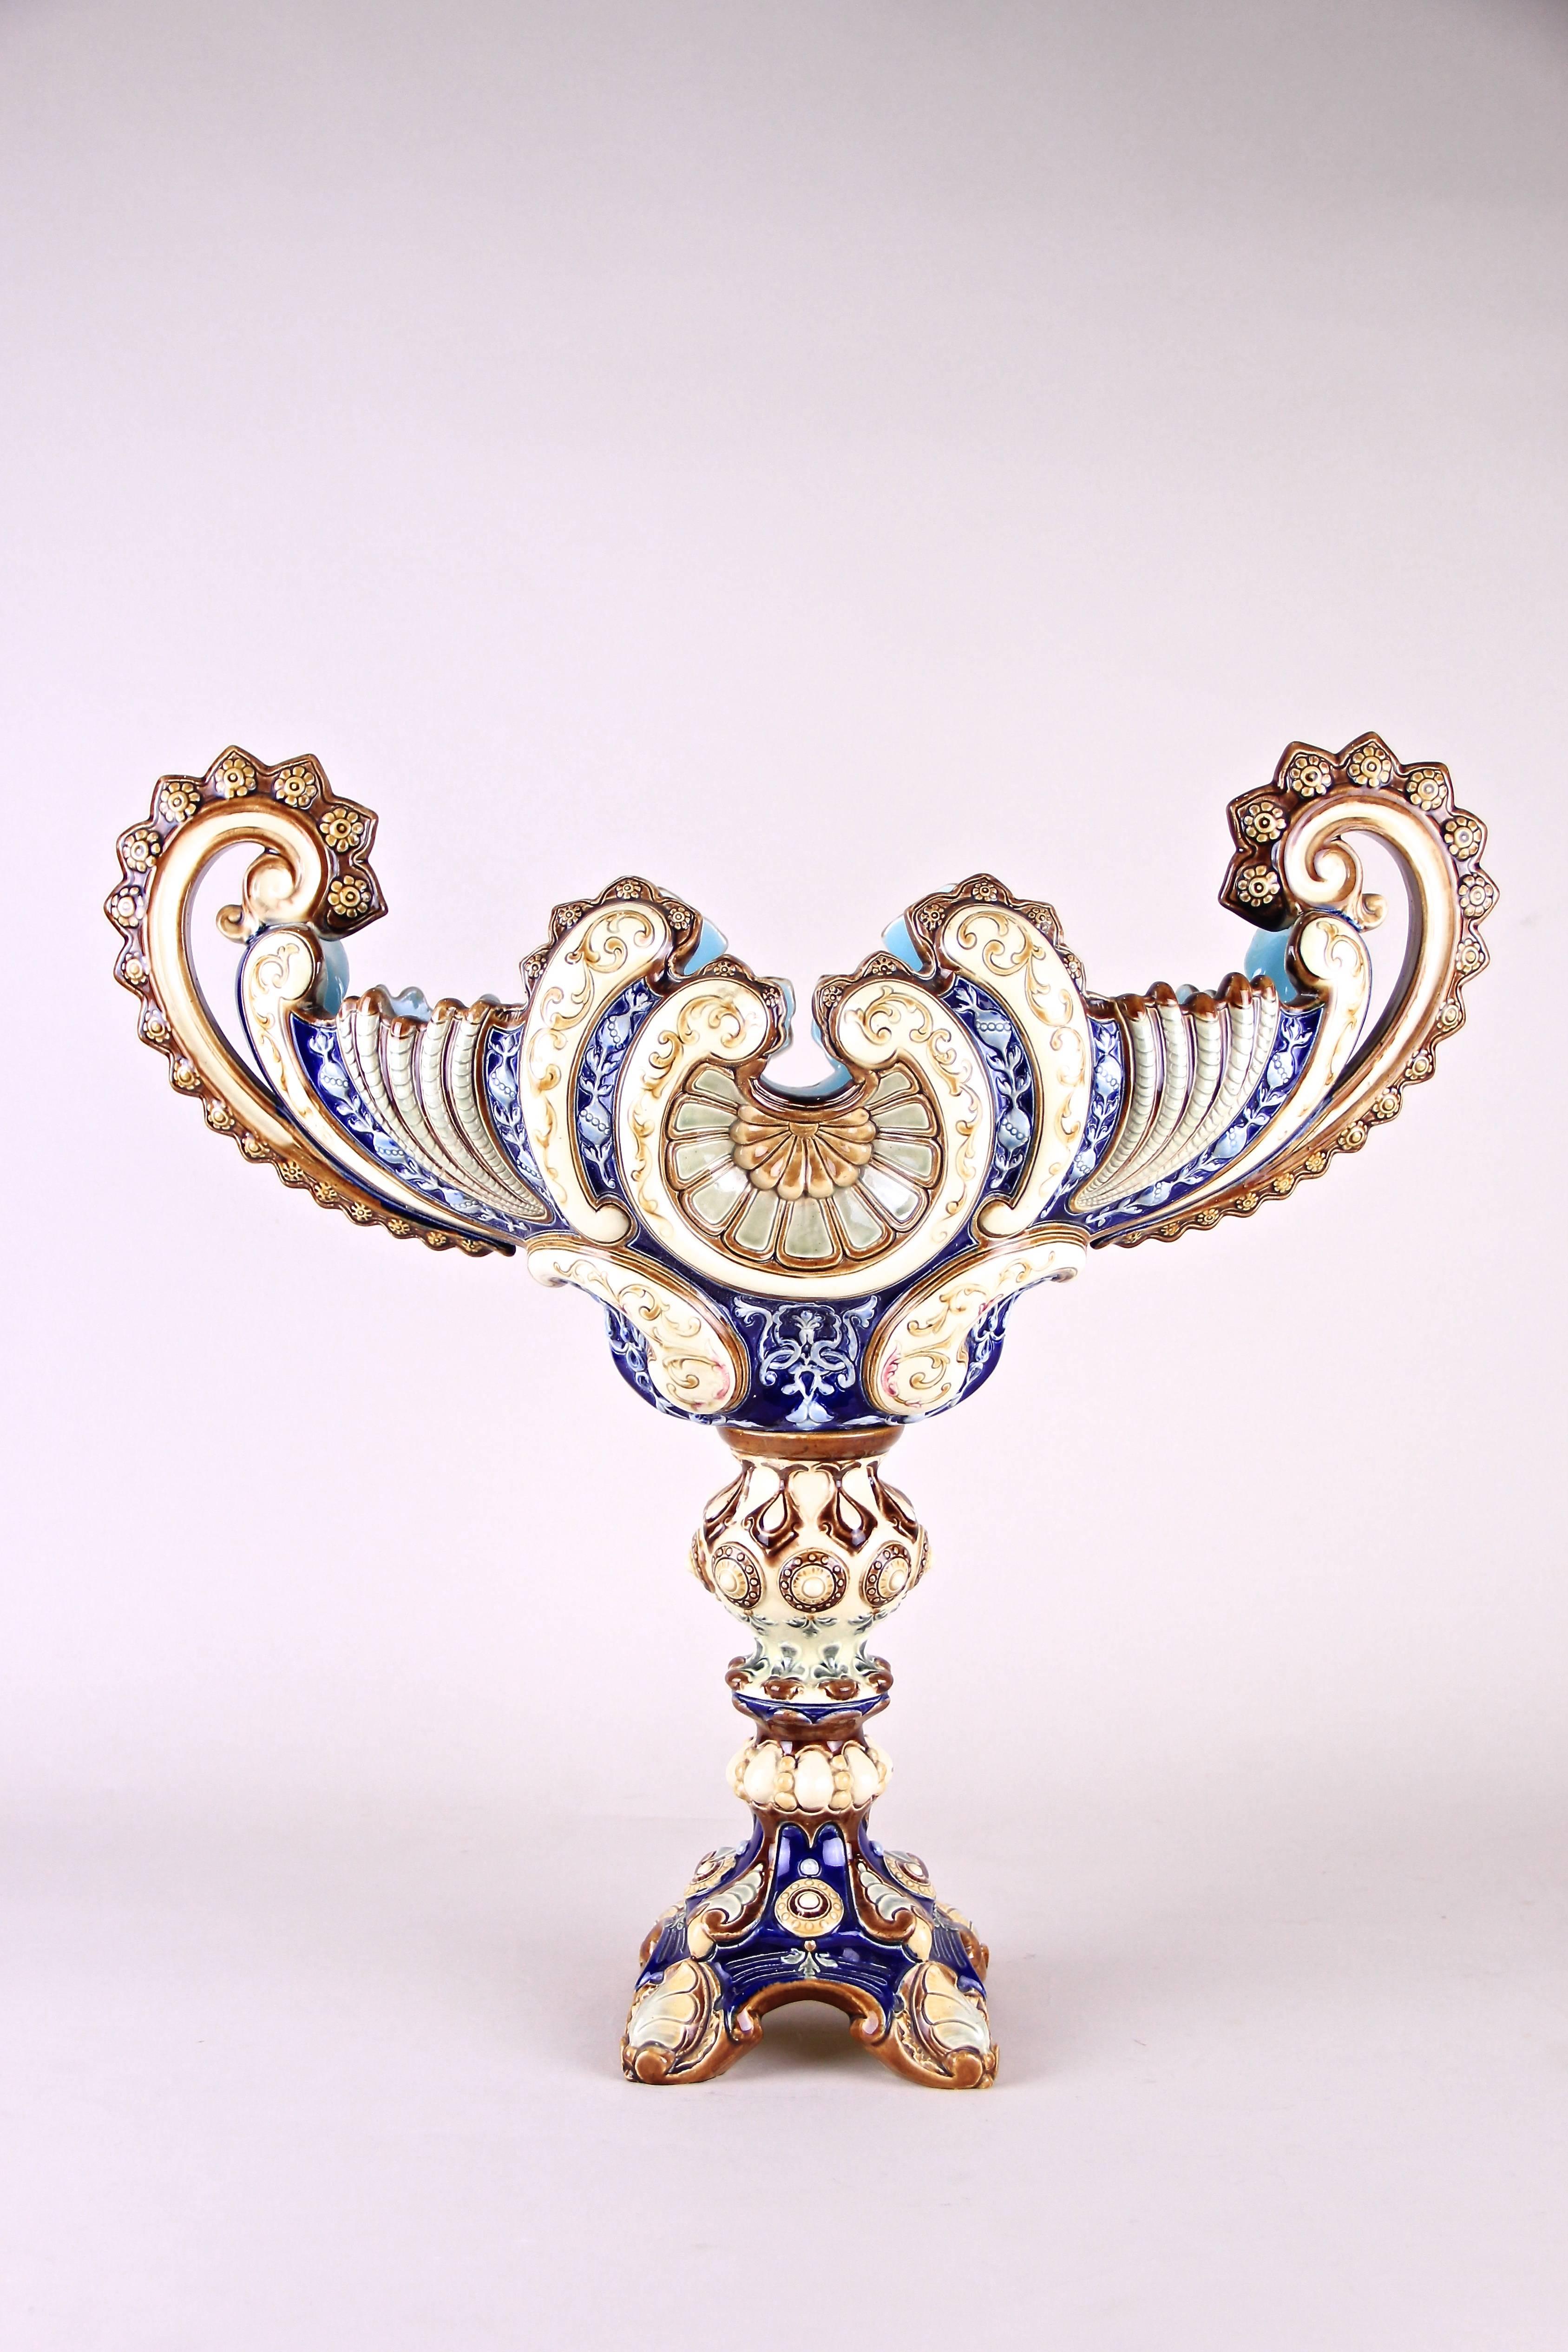 Breathtaking large Majolica centrepiece/ jardiniere from circa 1890. Made by the famous company of Wilhelm Schiller & Son in Bohemia this rare majolica masterpiece showing a beautiful sea-related design with nice shells as the main center. The